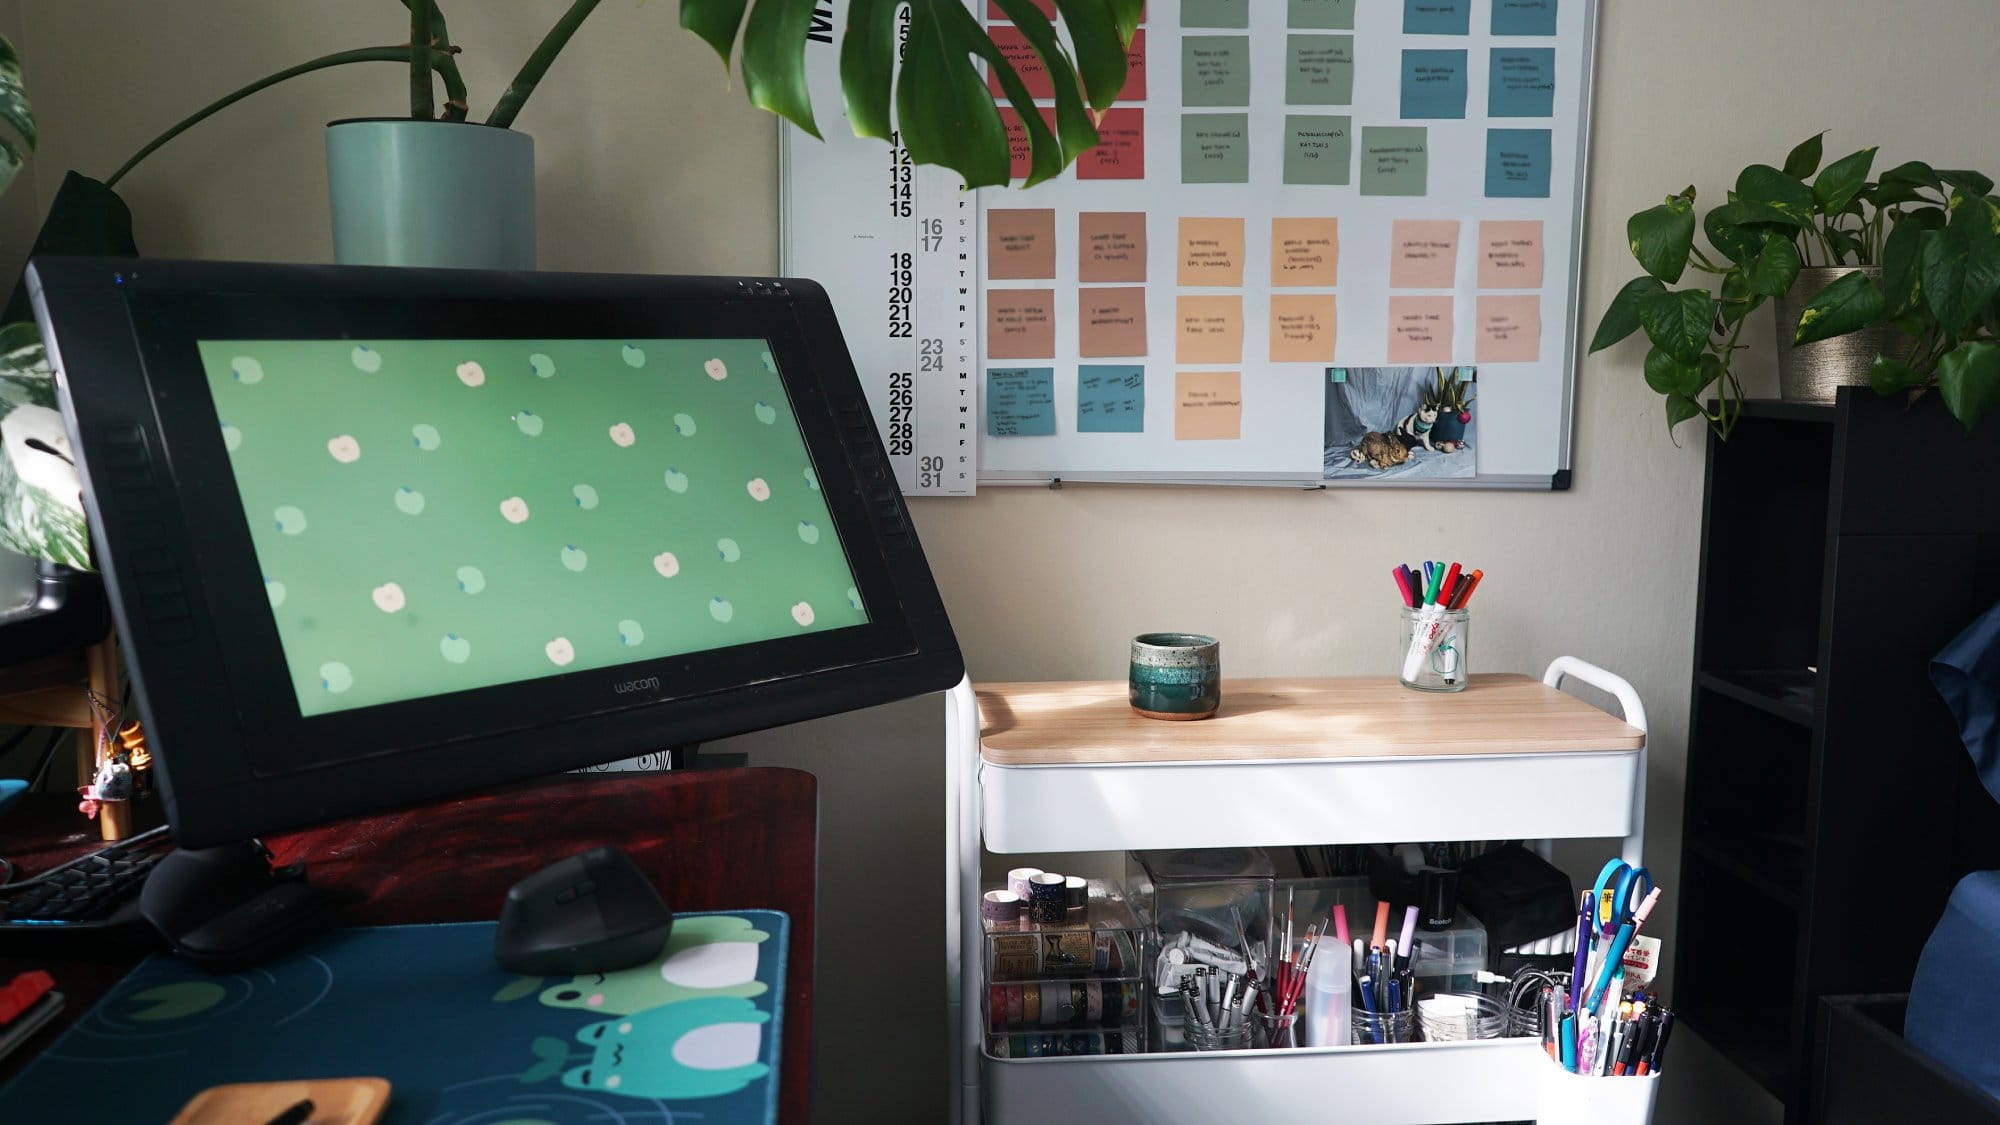 A creative workspace with a digital drawing tablet, an organised wall planner, and a desk with art supplies and potted plants